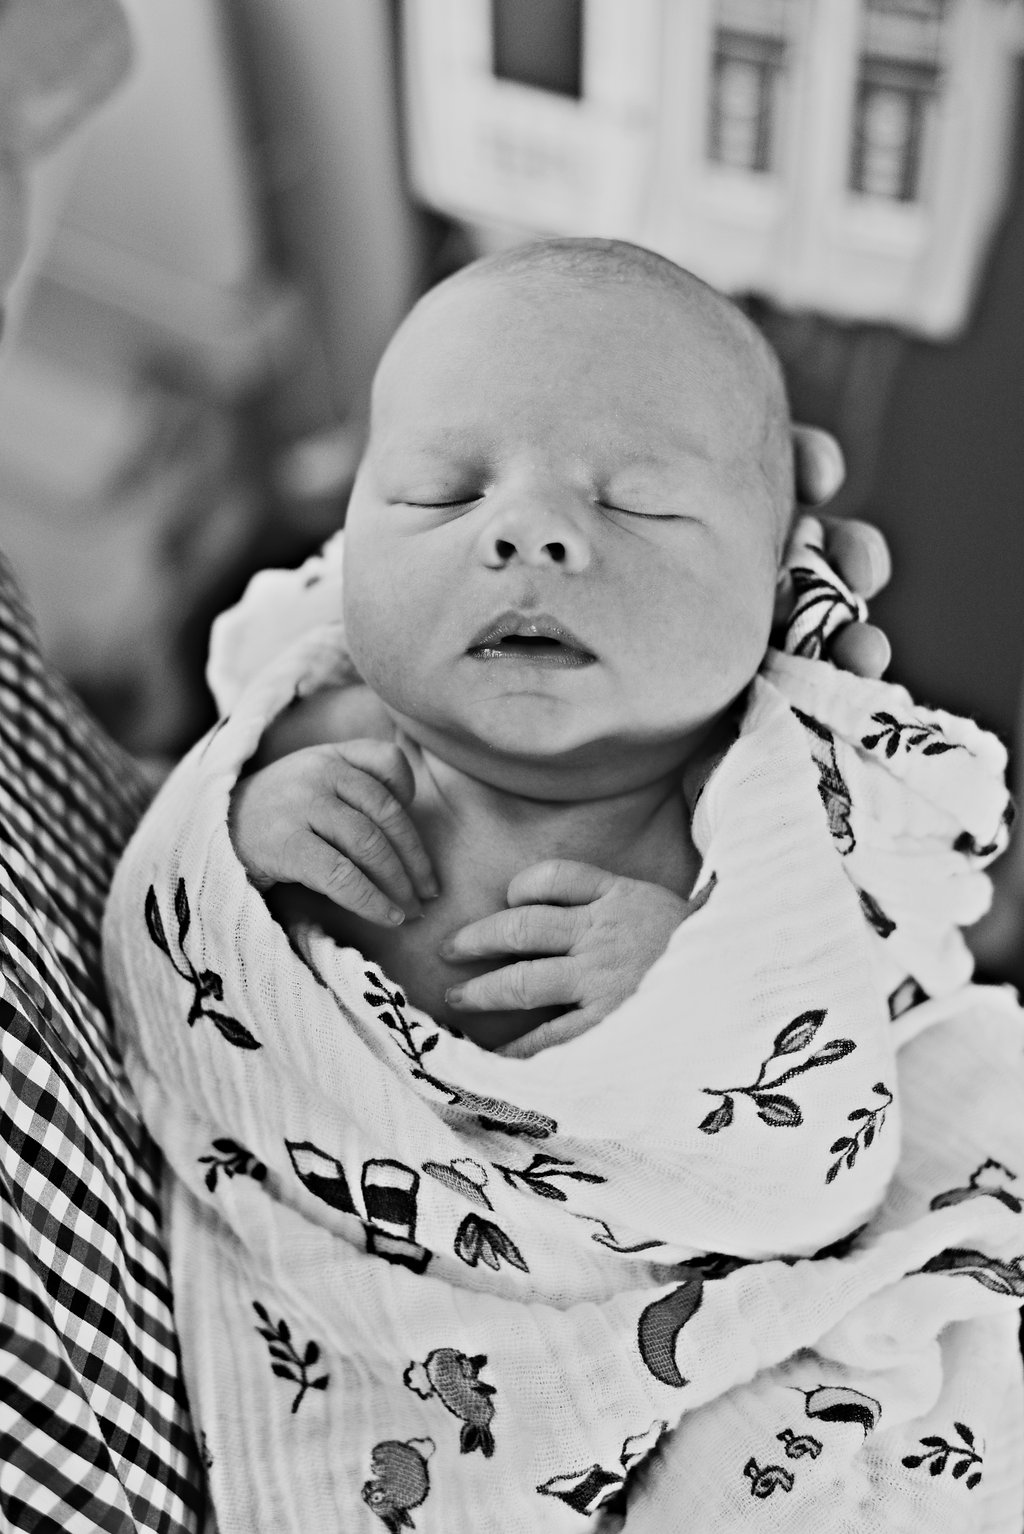 Birth Story: Told in Hospital Photos